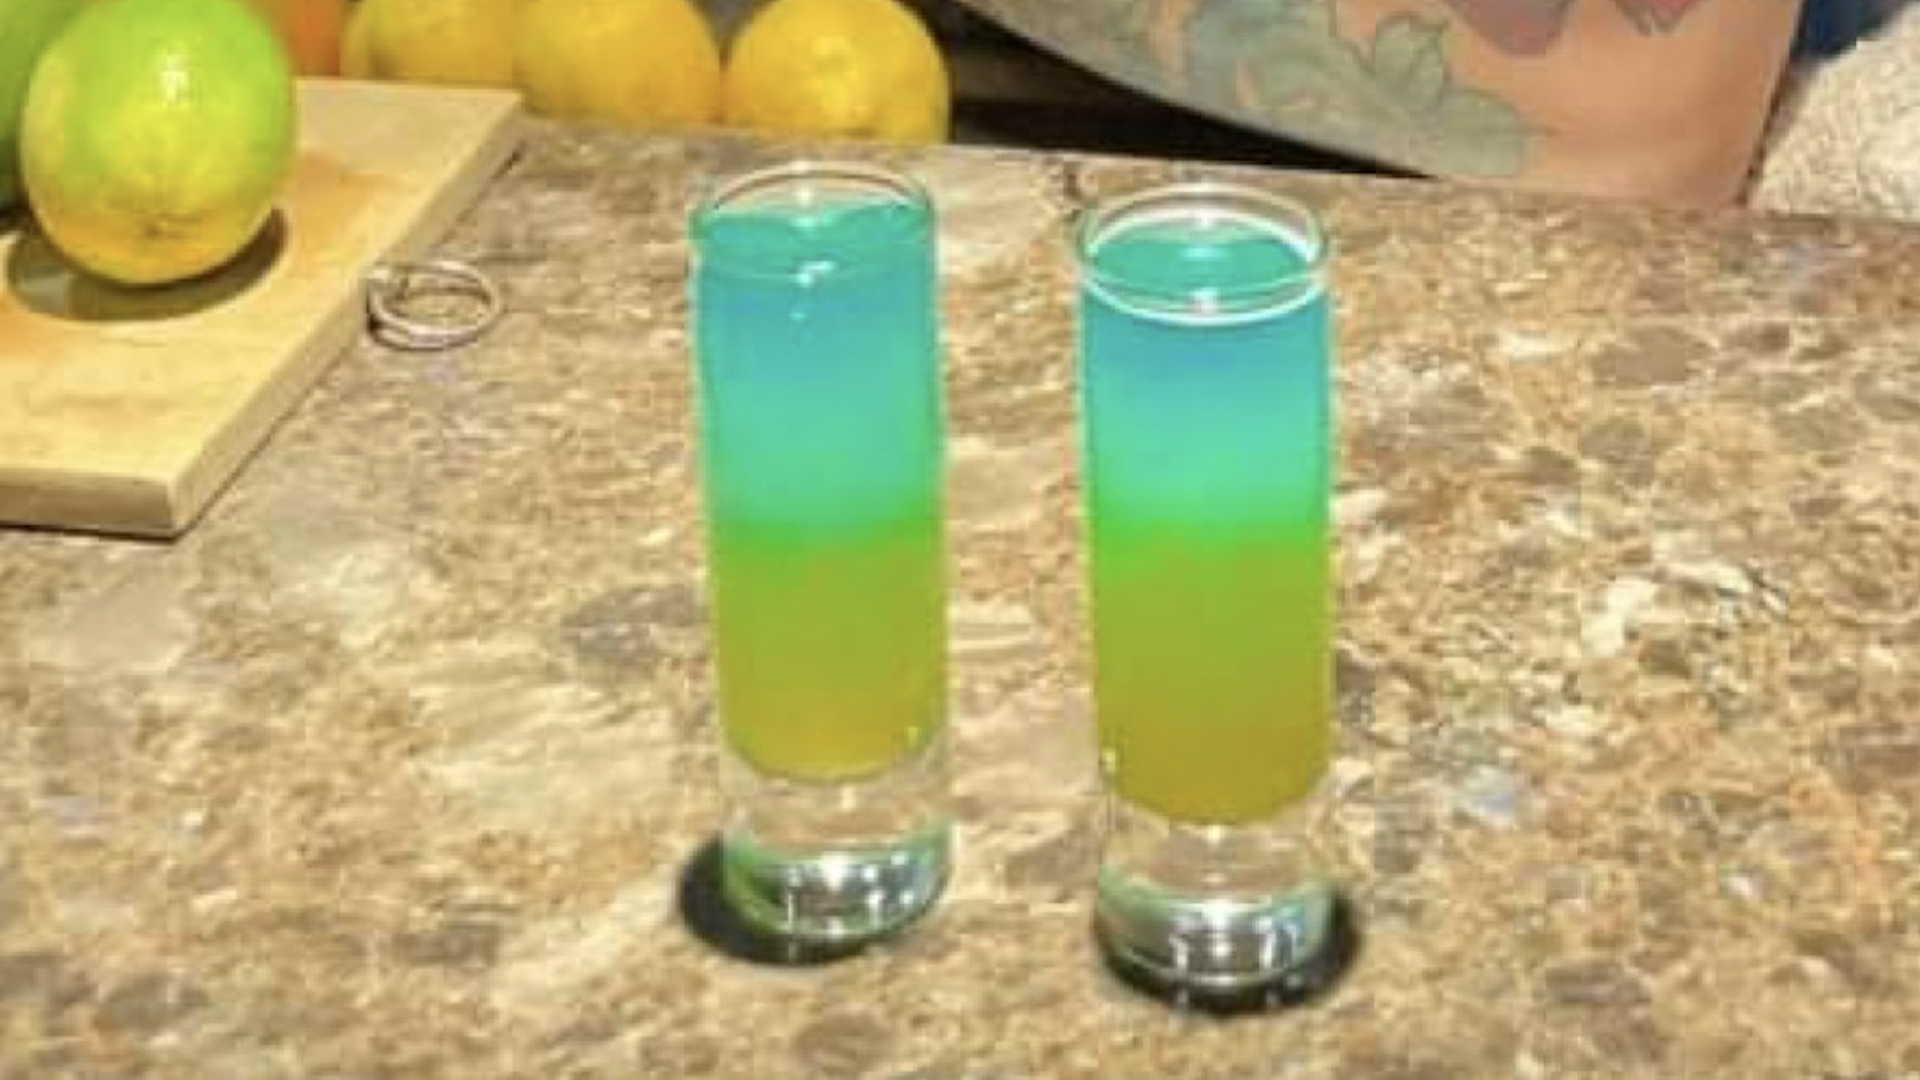 Two shots in the colors of the Ukranian flag